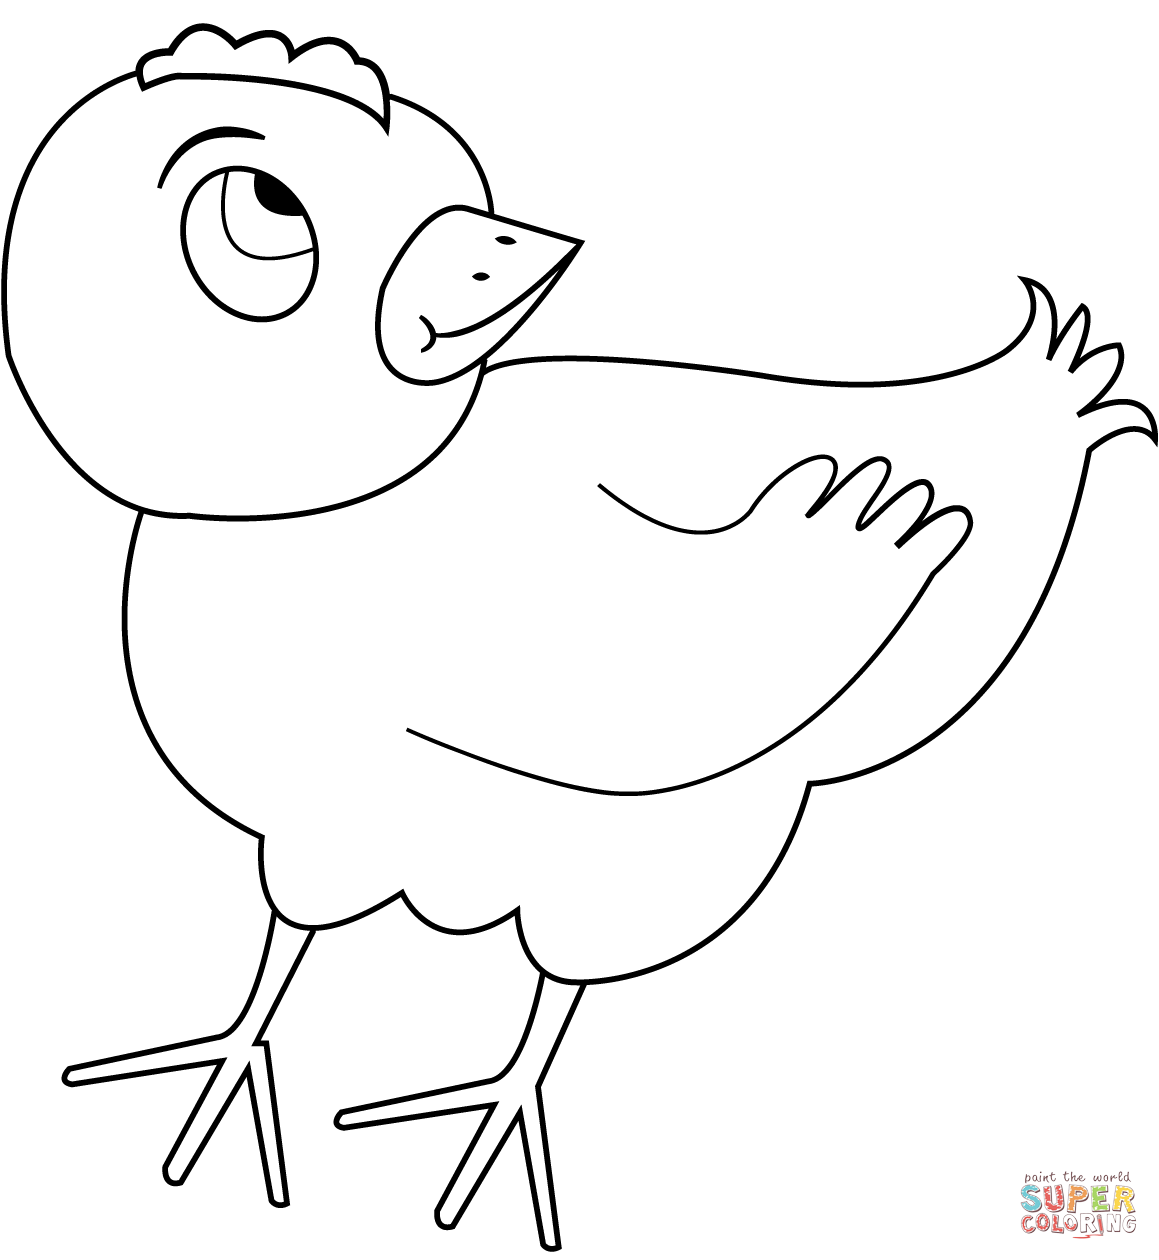 Cute chicken coloring page free printable coloring pages